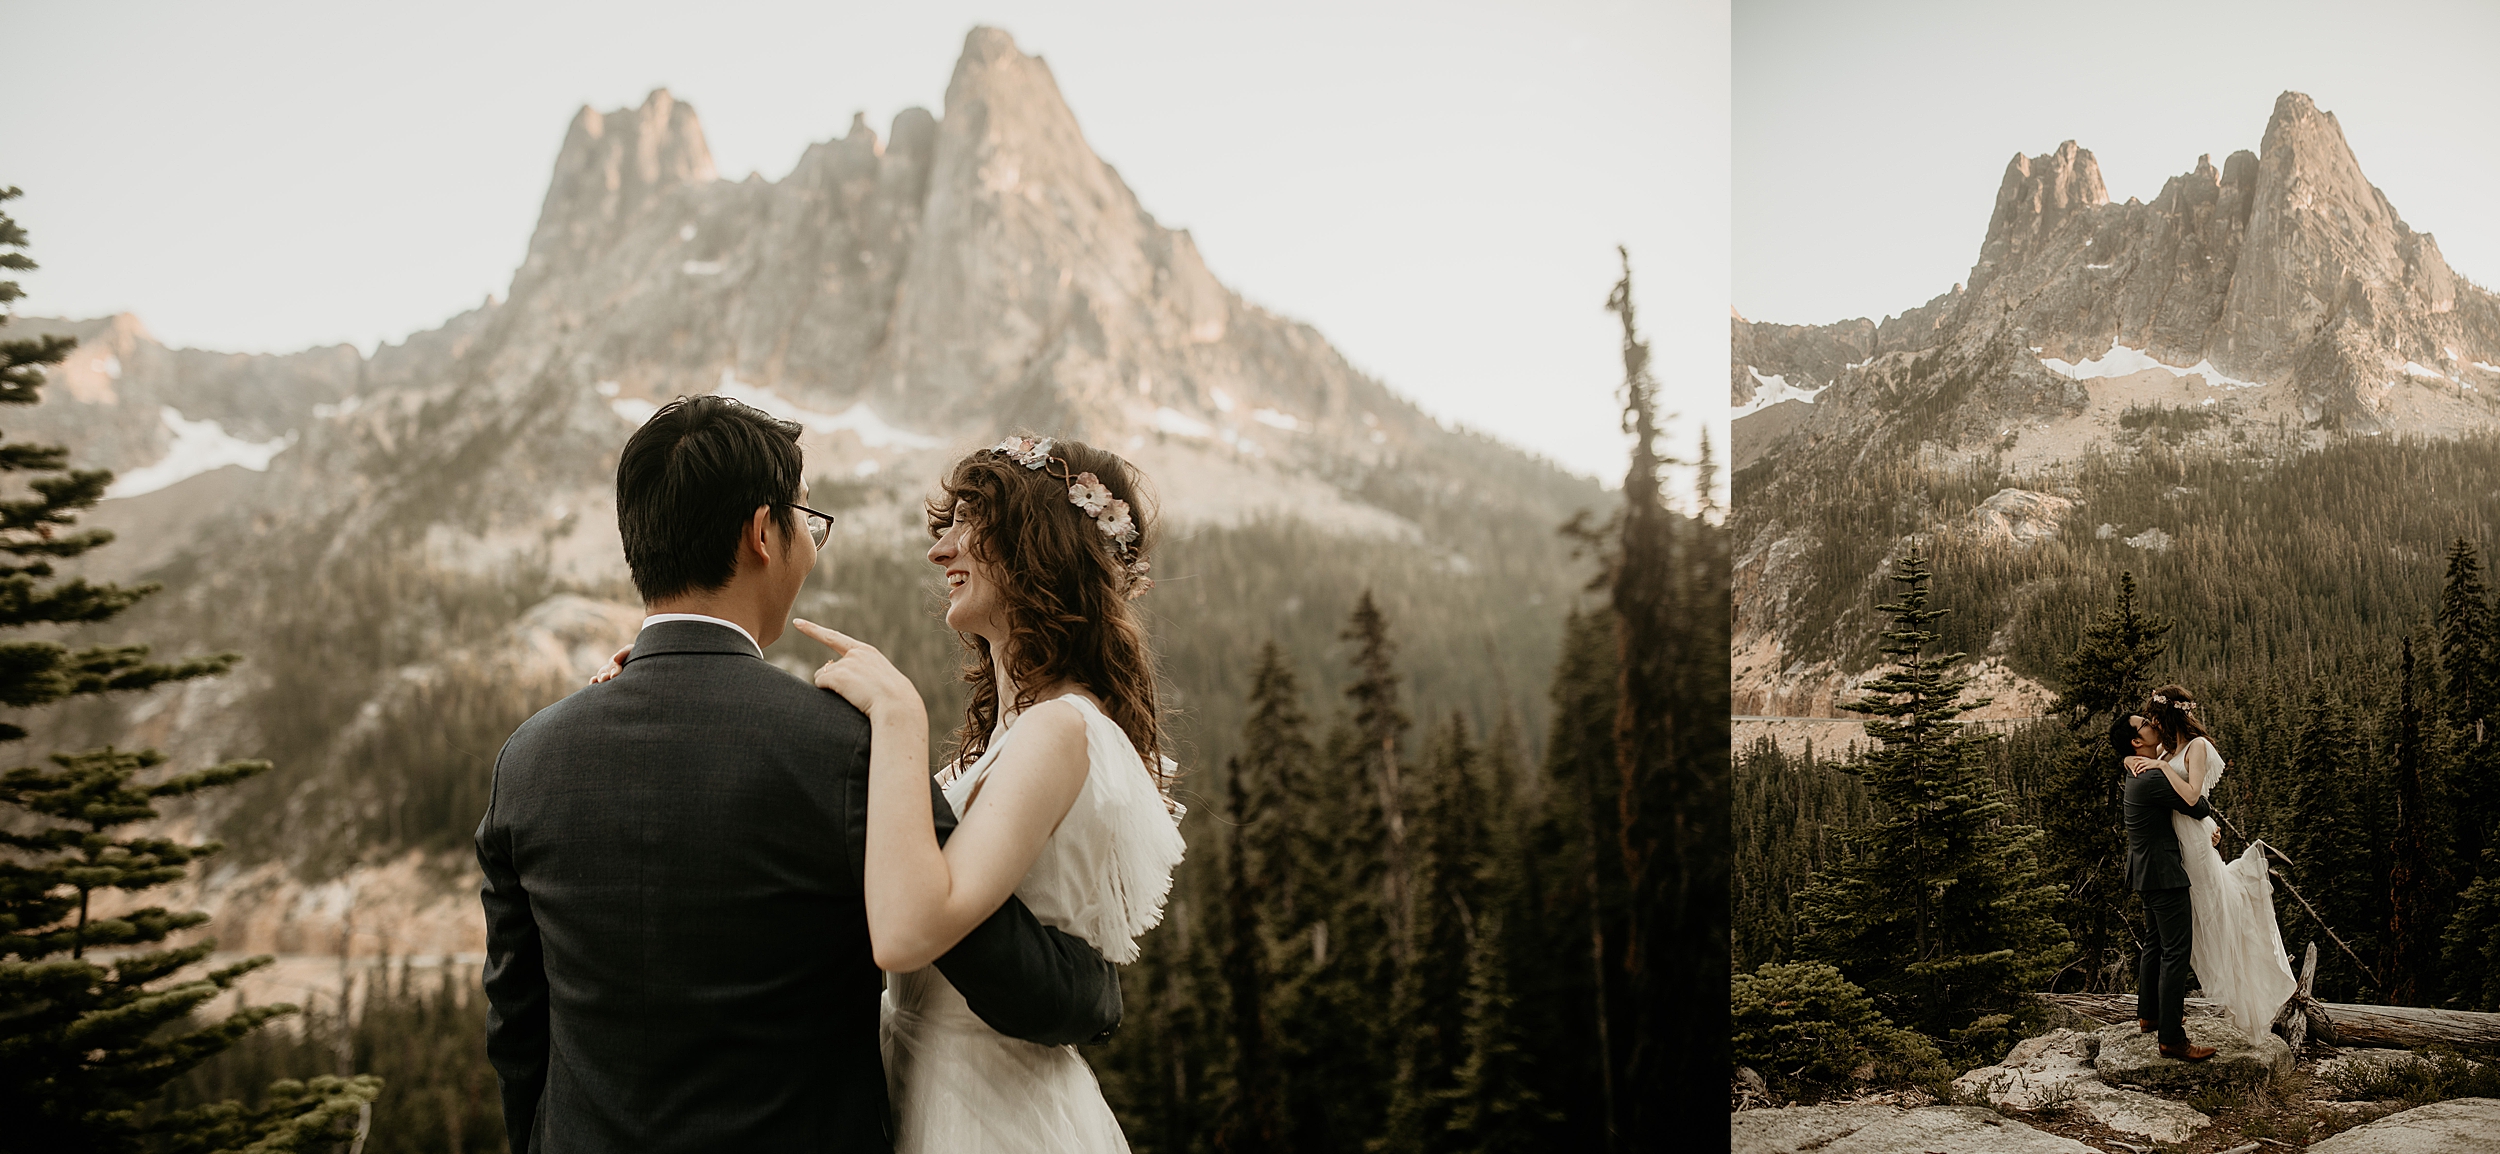 bride and groom holding each other washington pass landscape